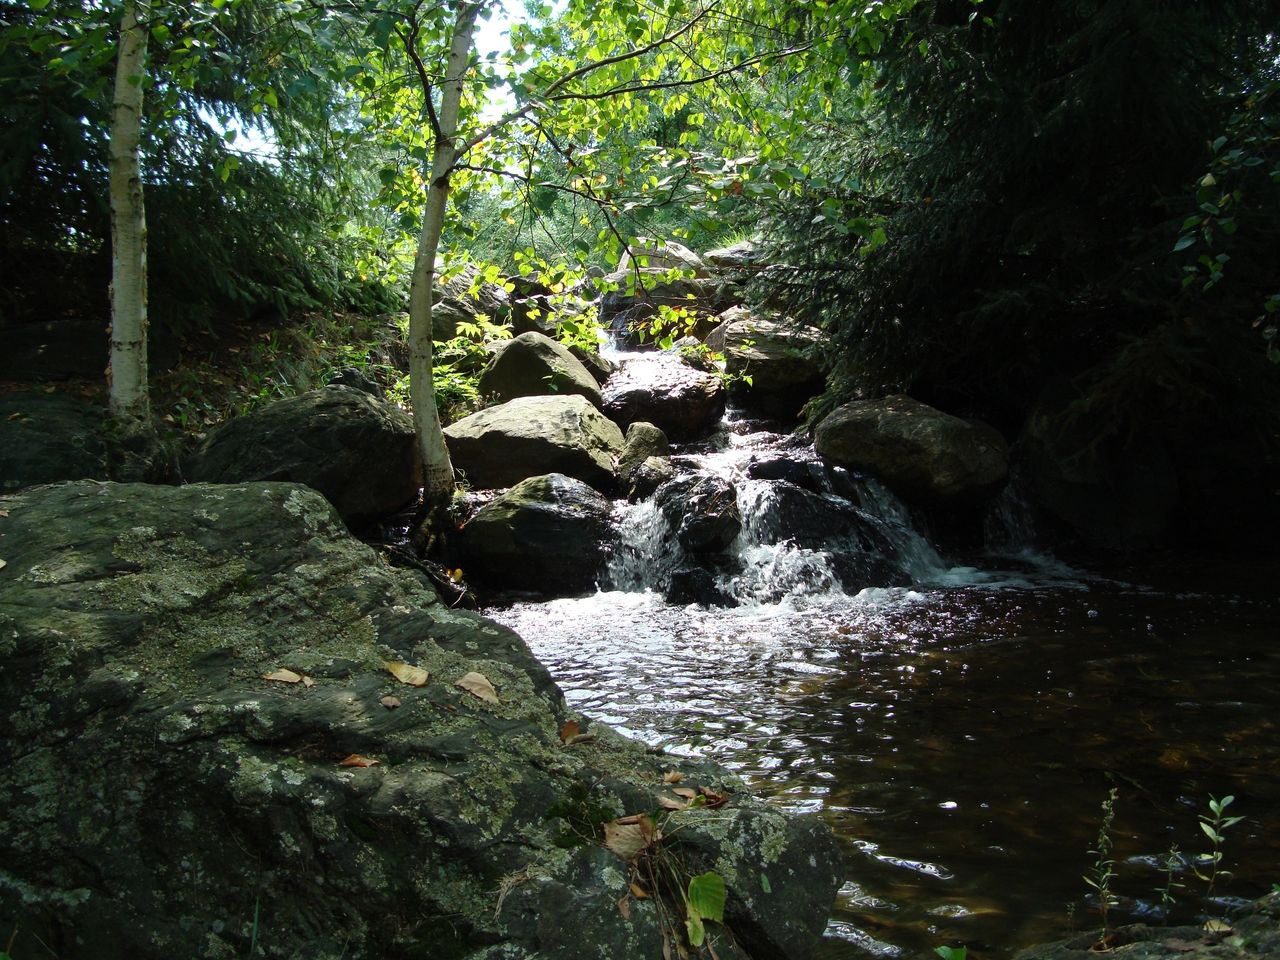 A stream running through the woods with rocks and trees.